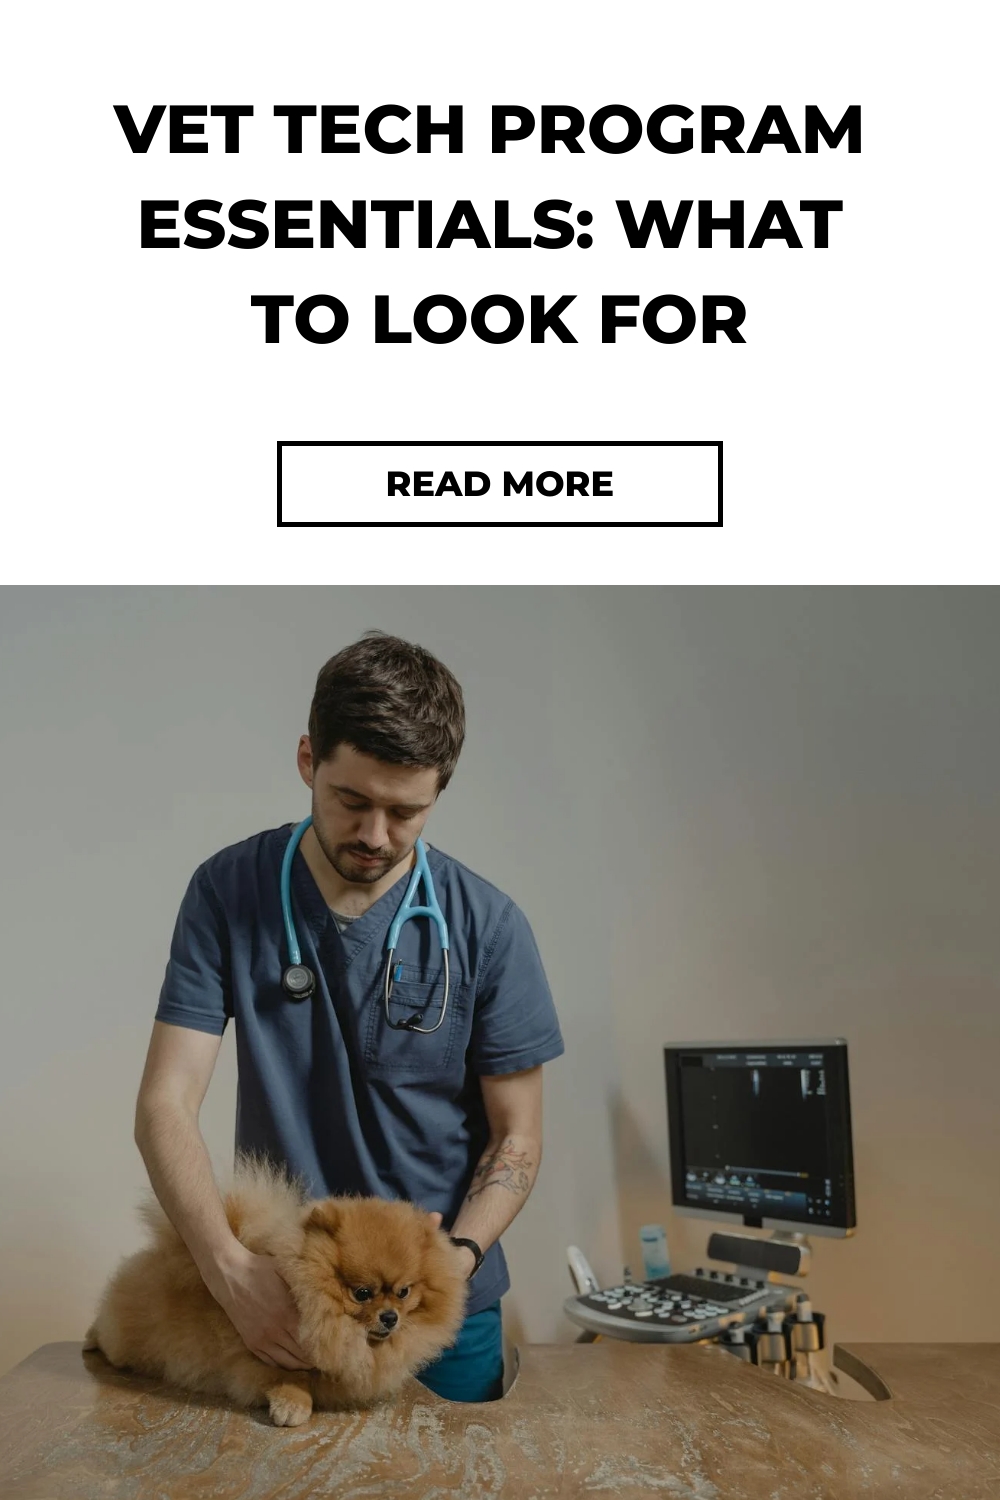 Vet Tech Program Essentials: What to Look For